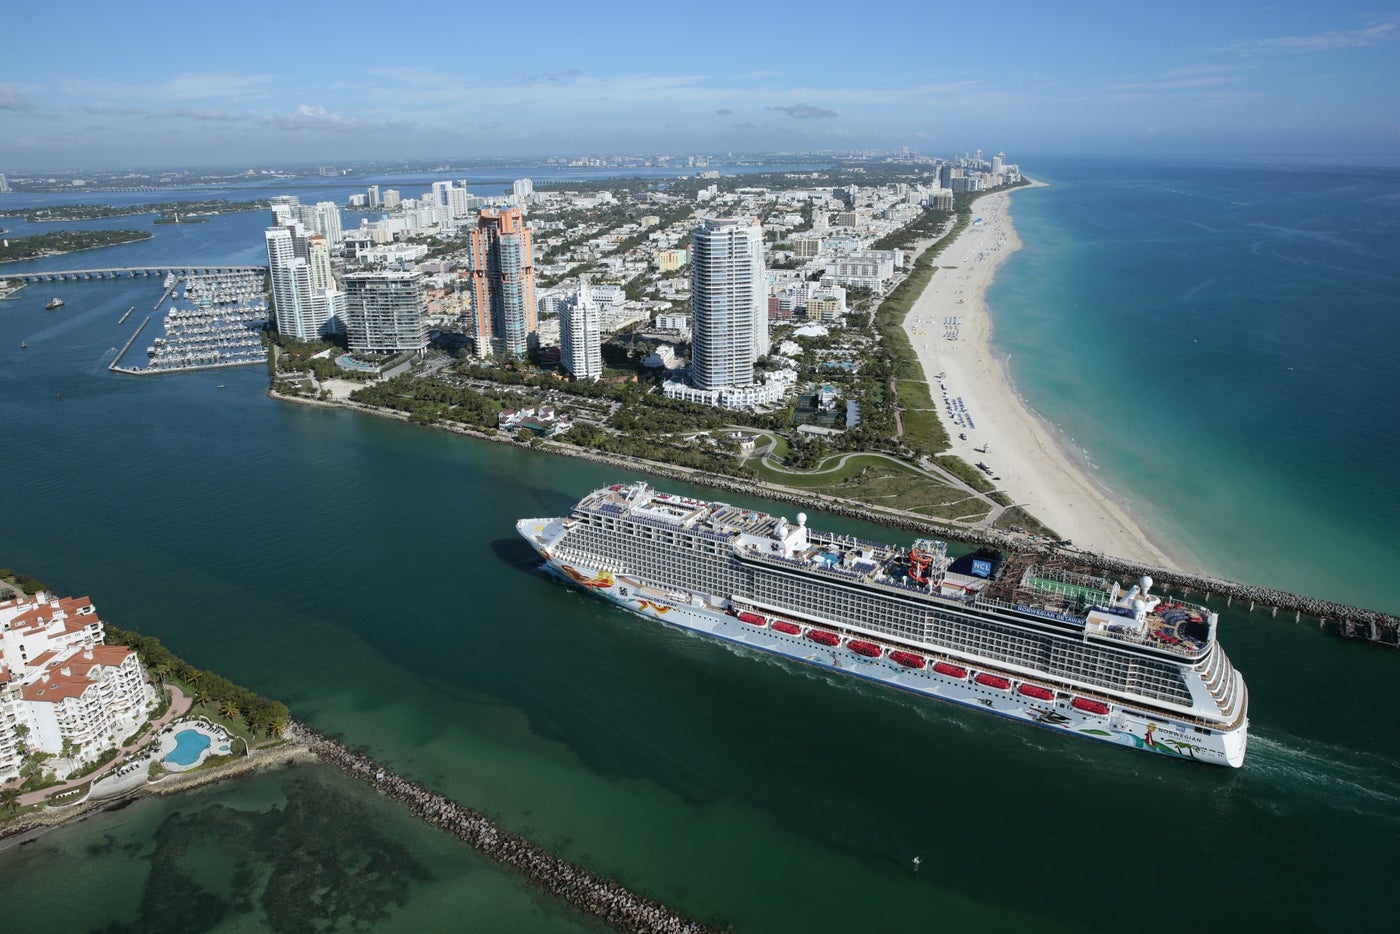 Miami cruise port guide Everything to know about hotels, sites, transfers